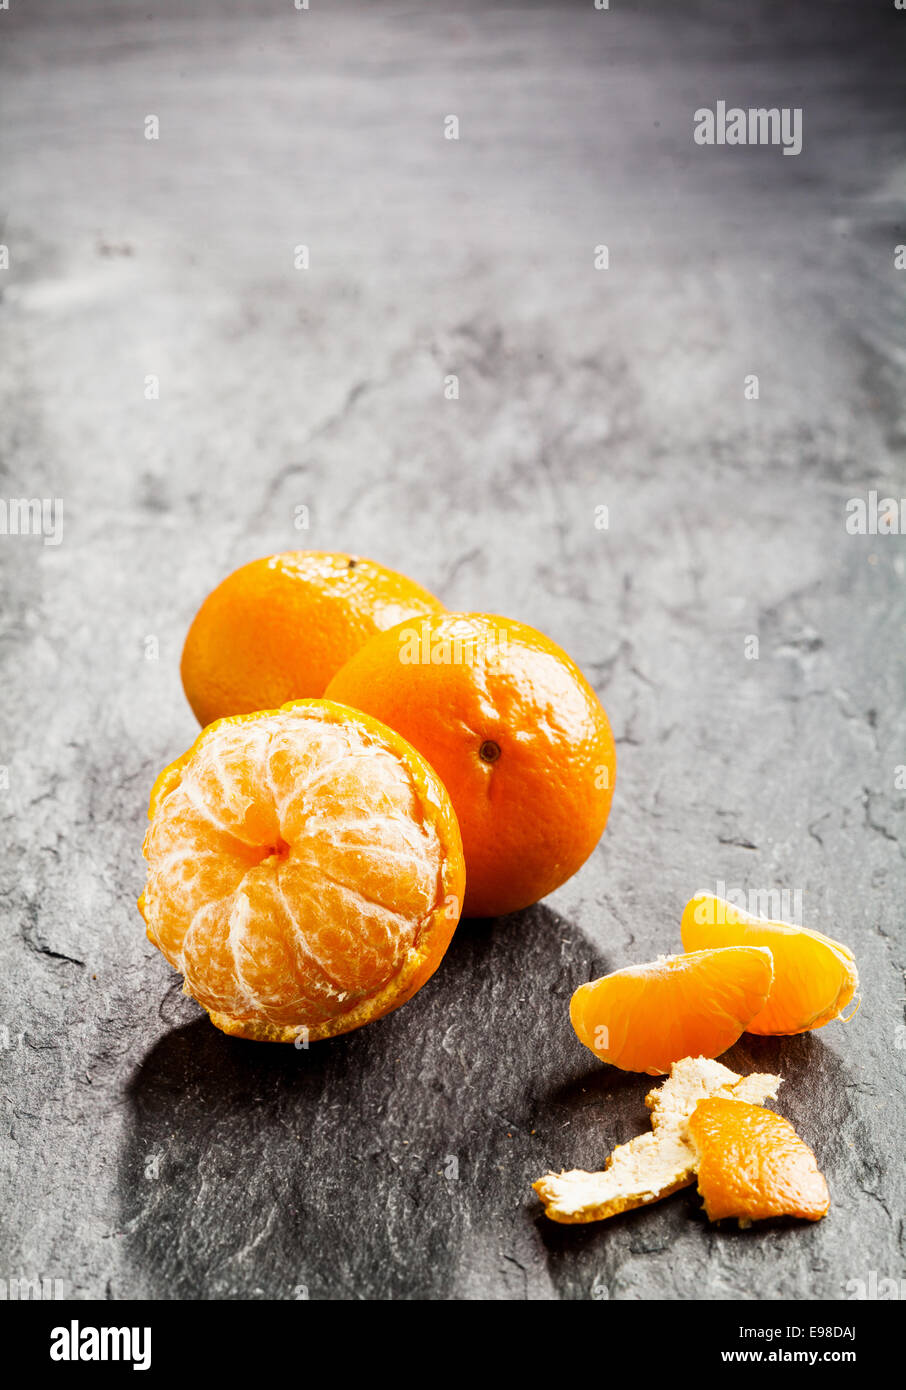 or and peel background dark scattered clementine a segments Stock nectarine, loose Photo copyspace Alamy with - with on tangerine sweet Peeled fresh